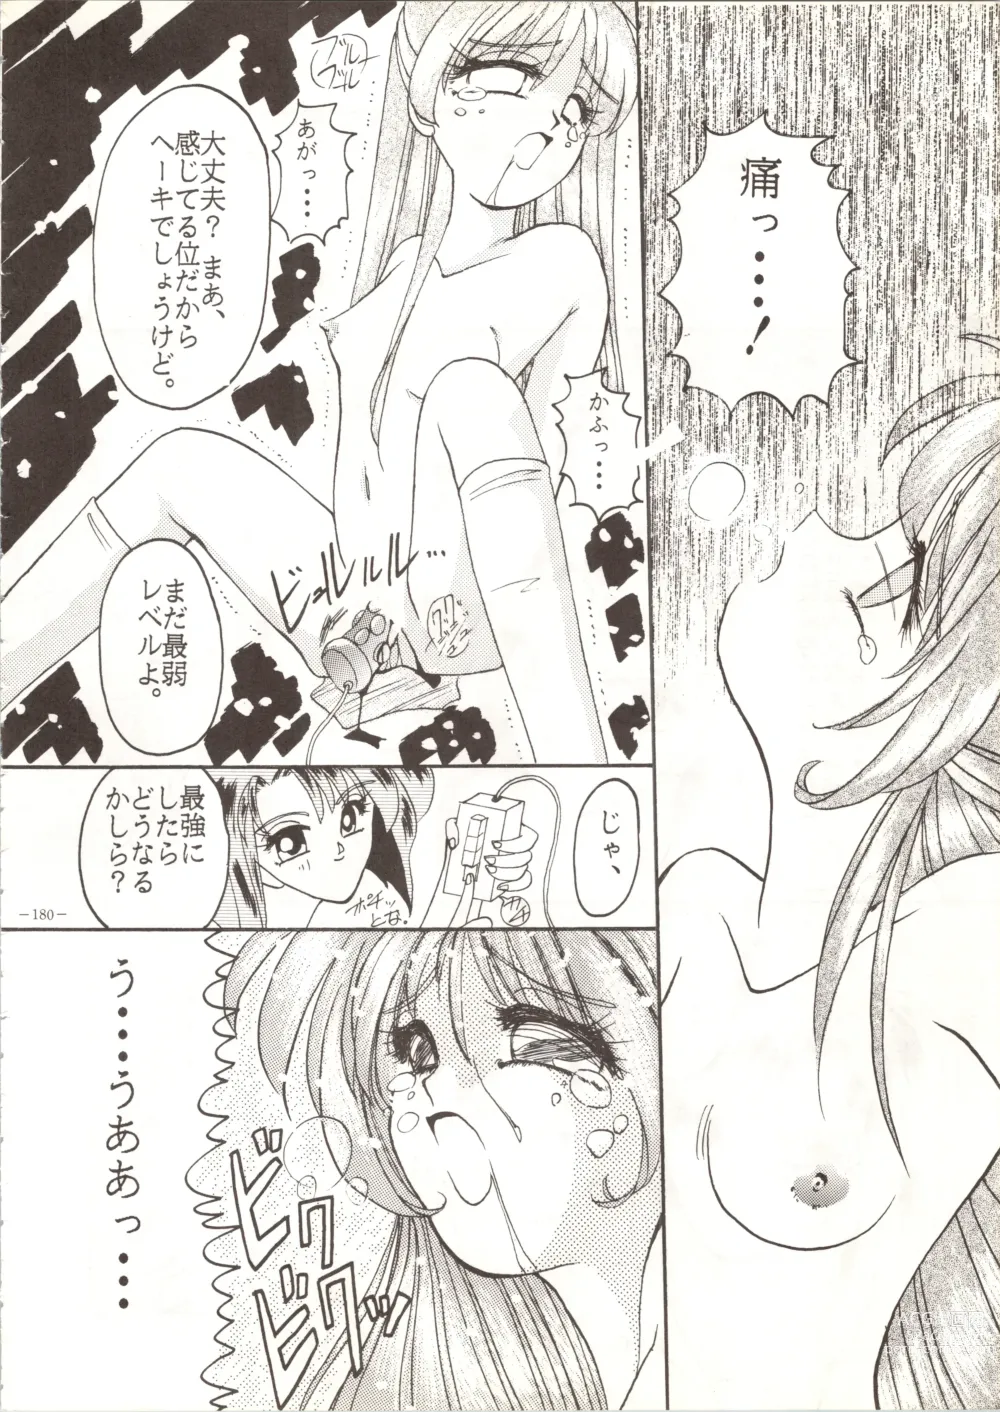 Page 180 of doujinshi MODEL SPECIAL